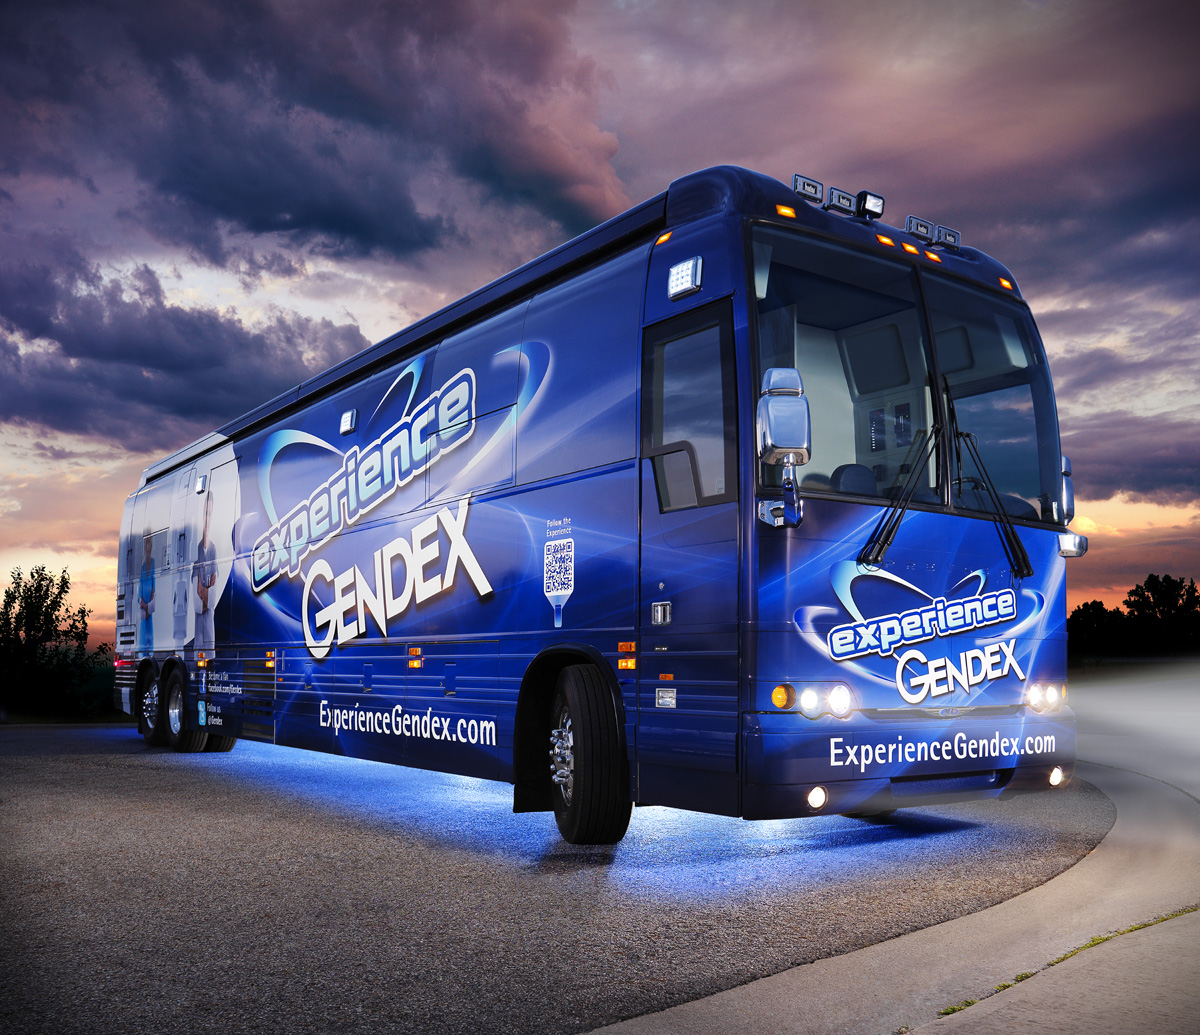 Experience Gendex Mobile Showroom Creation Video